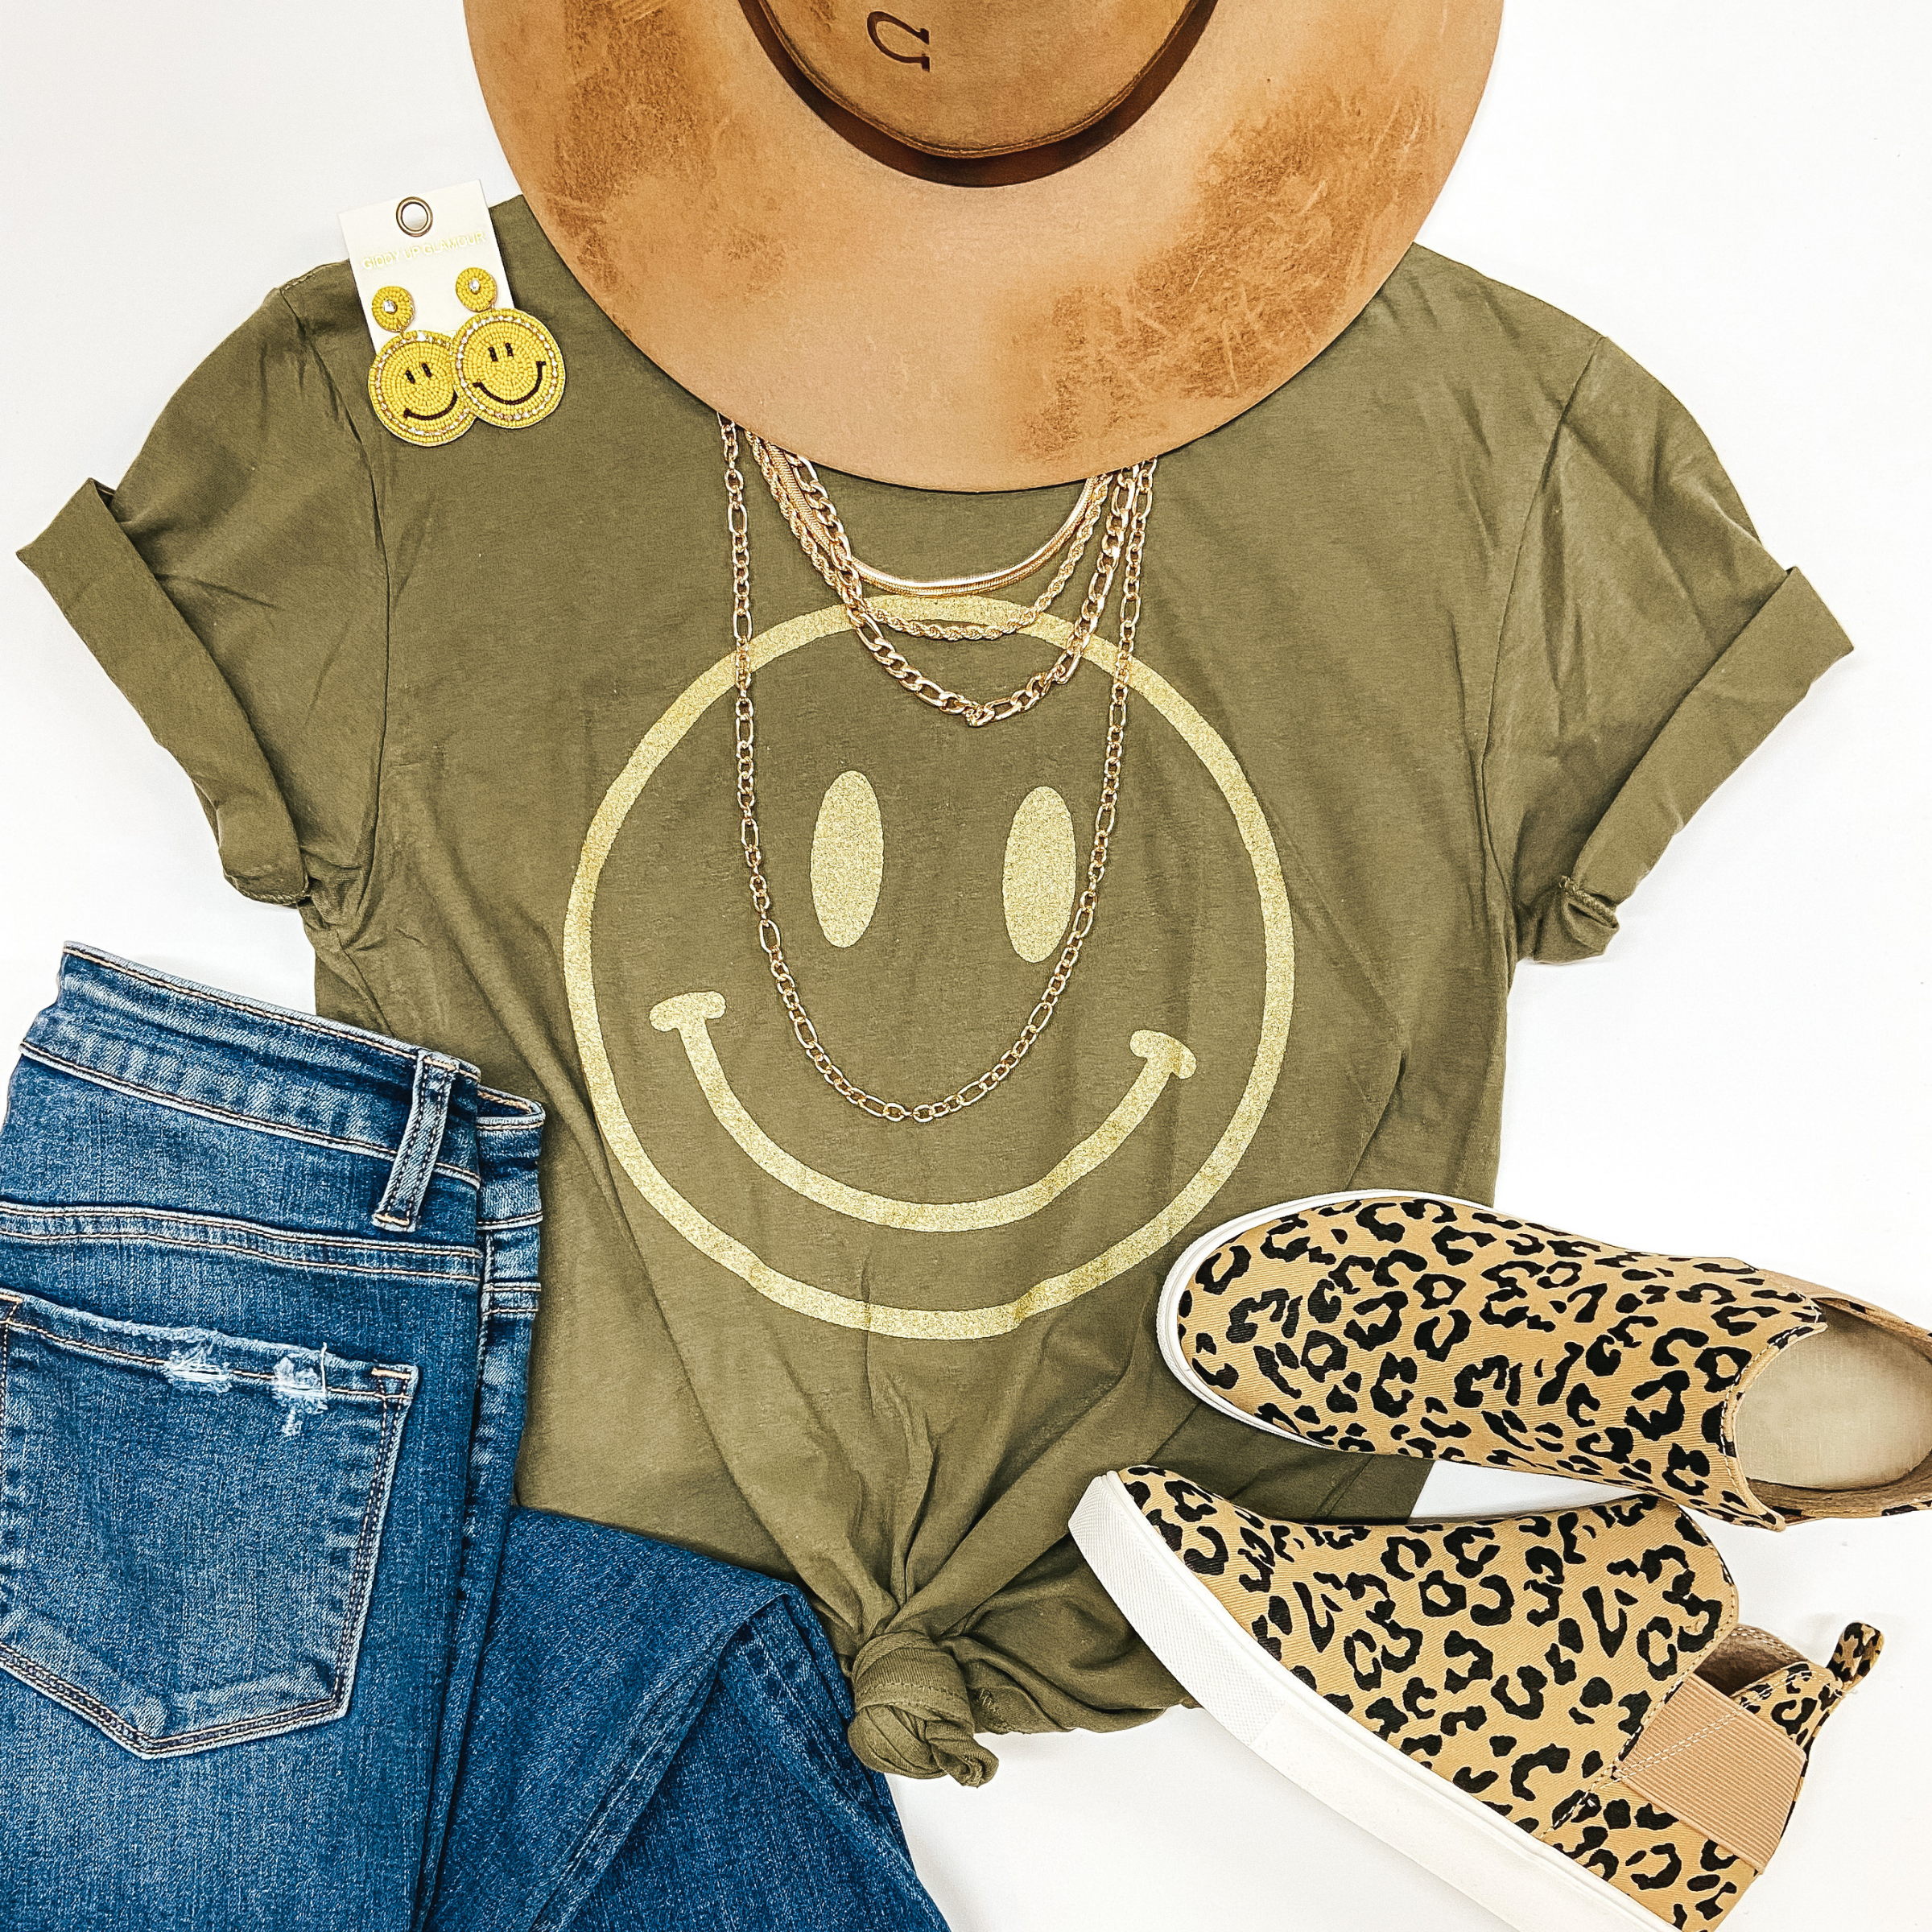 Olive green tee with a light green smiley face printed on it lies on a white background with a tan Charlie 1 Horse Hat, some necklaces, yellow glittery smily face earrings, leopard print slide on sandals, and medium wash jeans. 